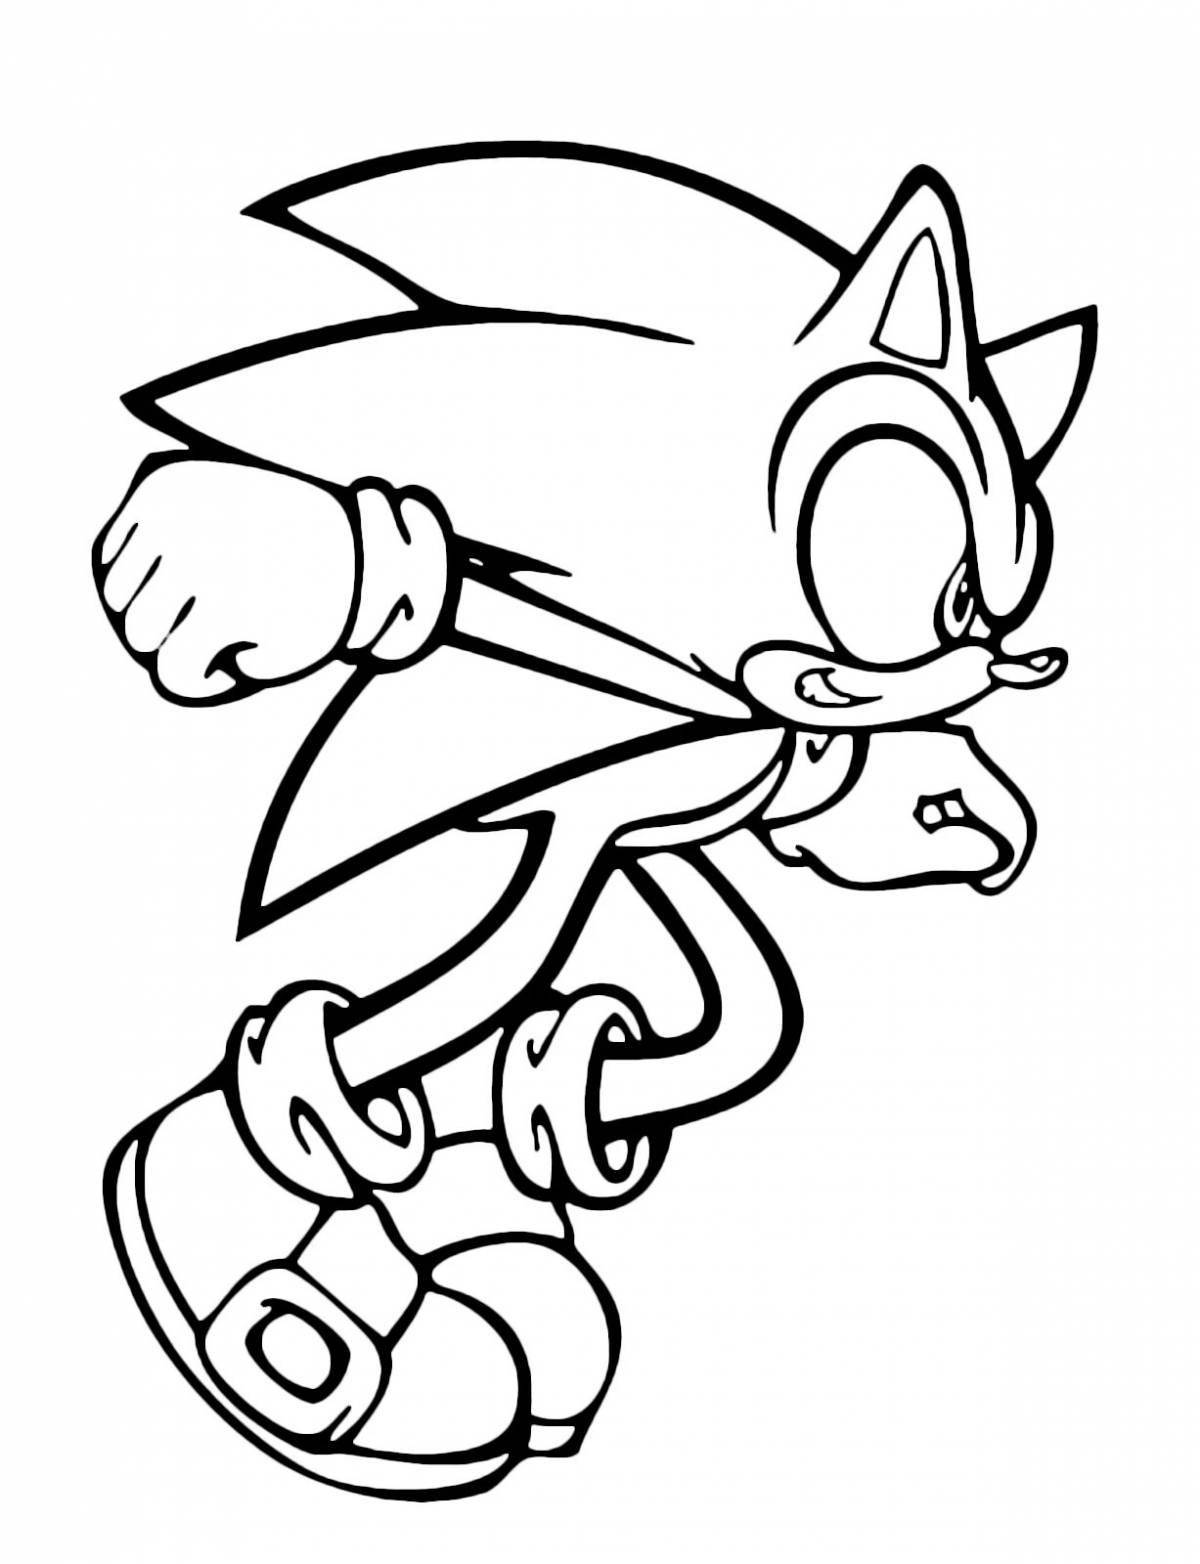 Fat yellow sonic coloring page